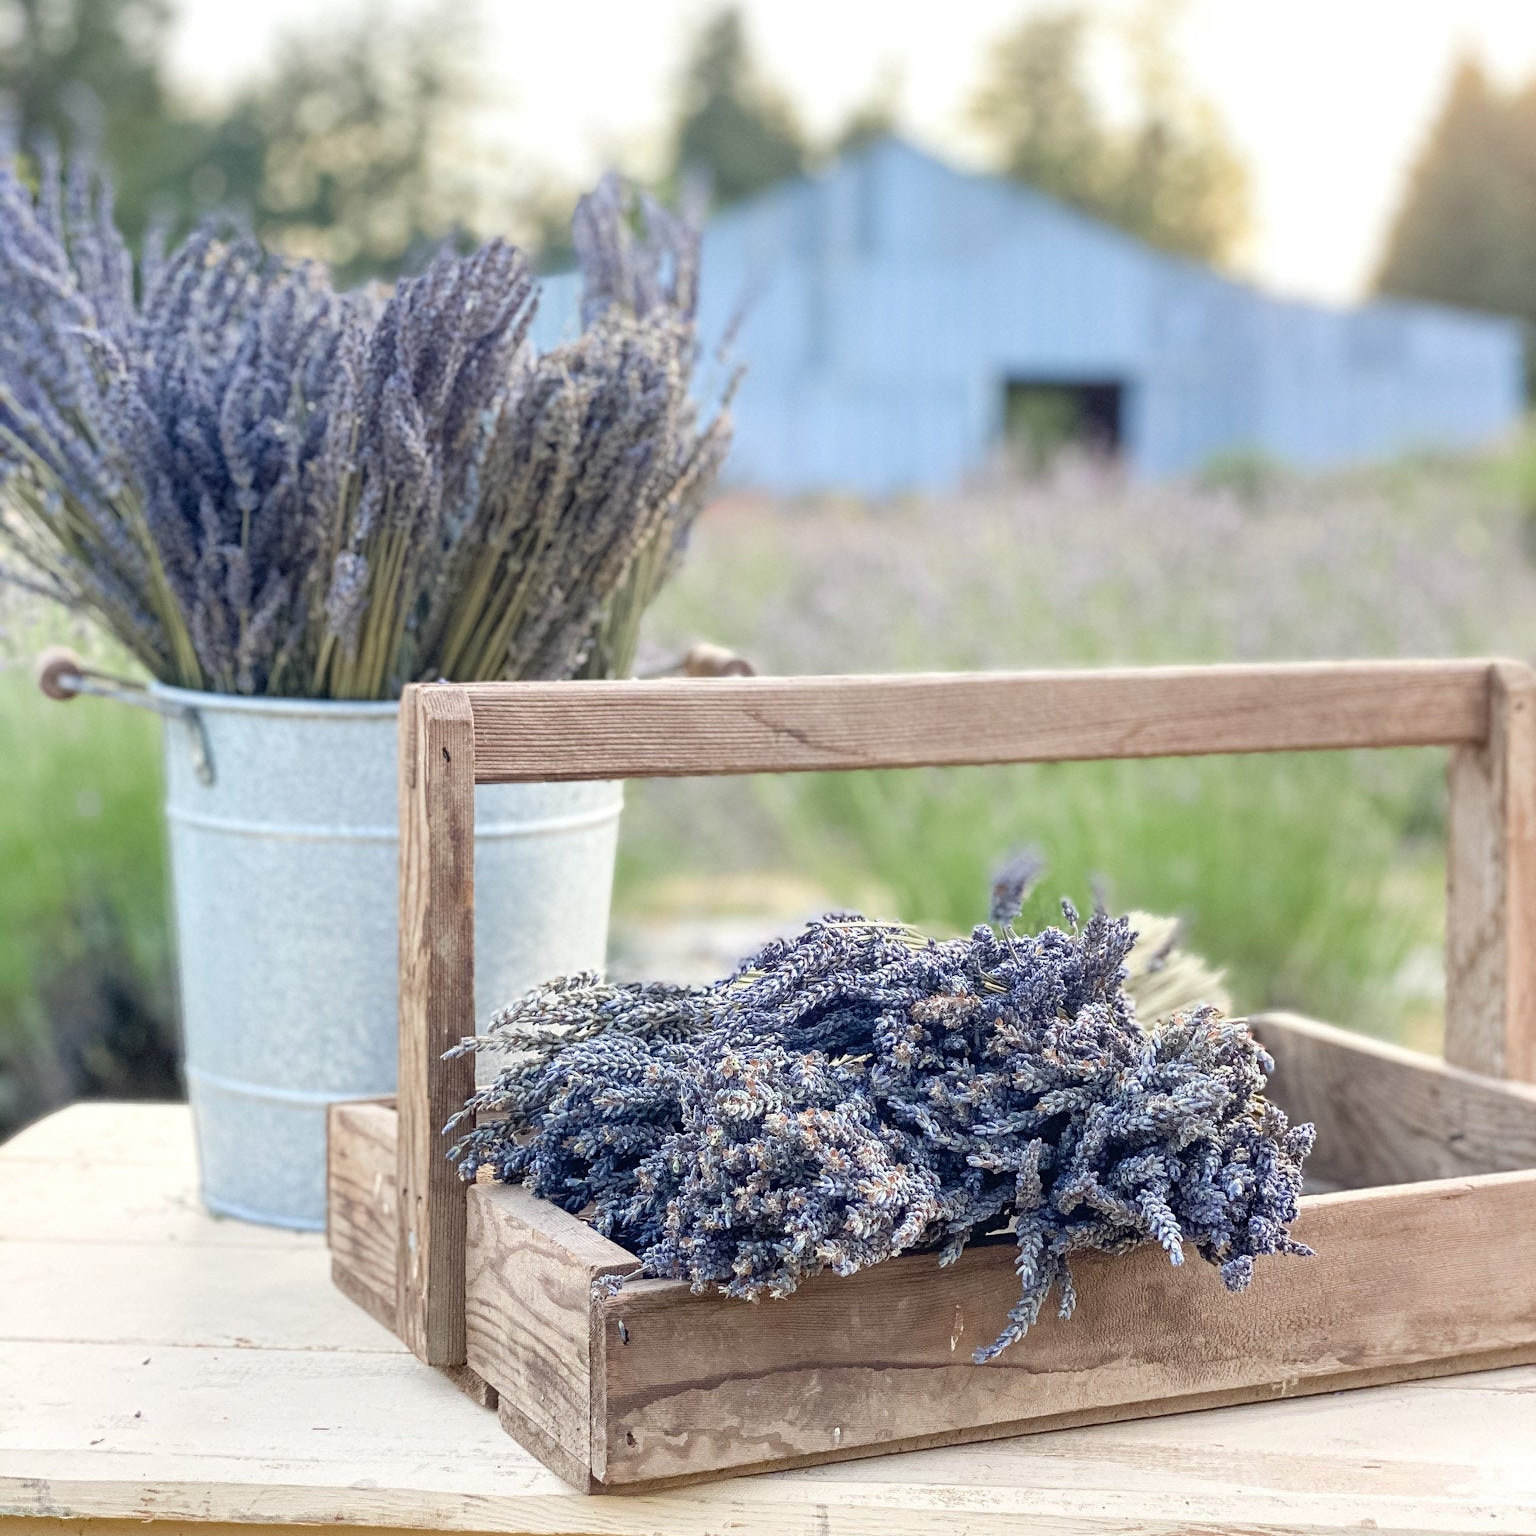 Dried French Lavender Bunches- Set of 2 - New York Lavender by the